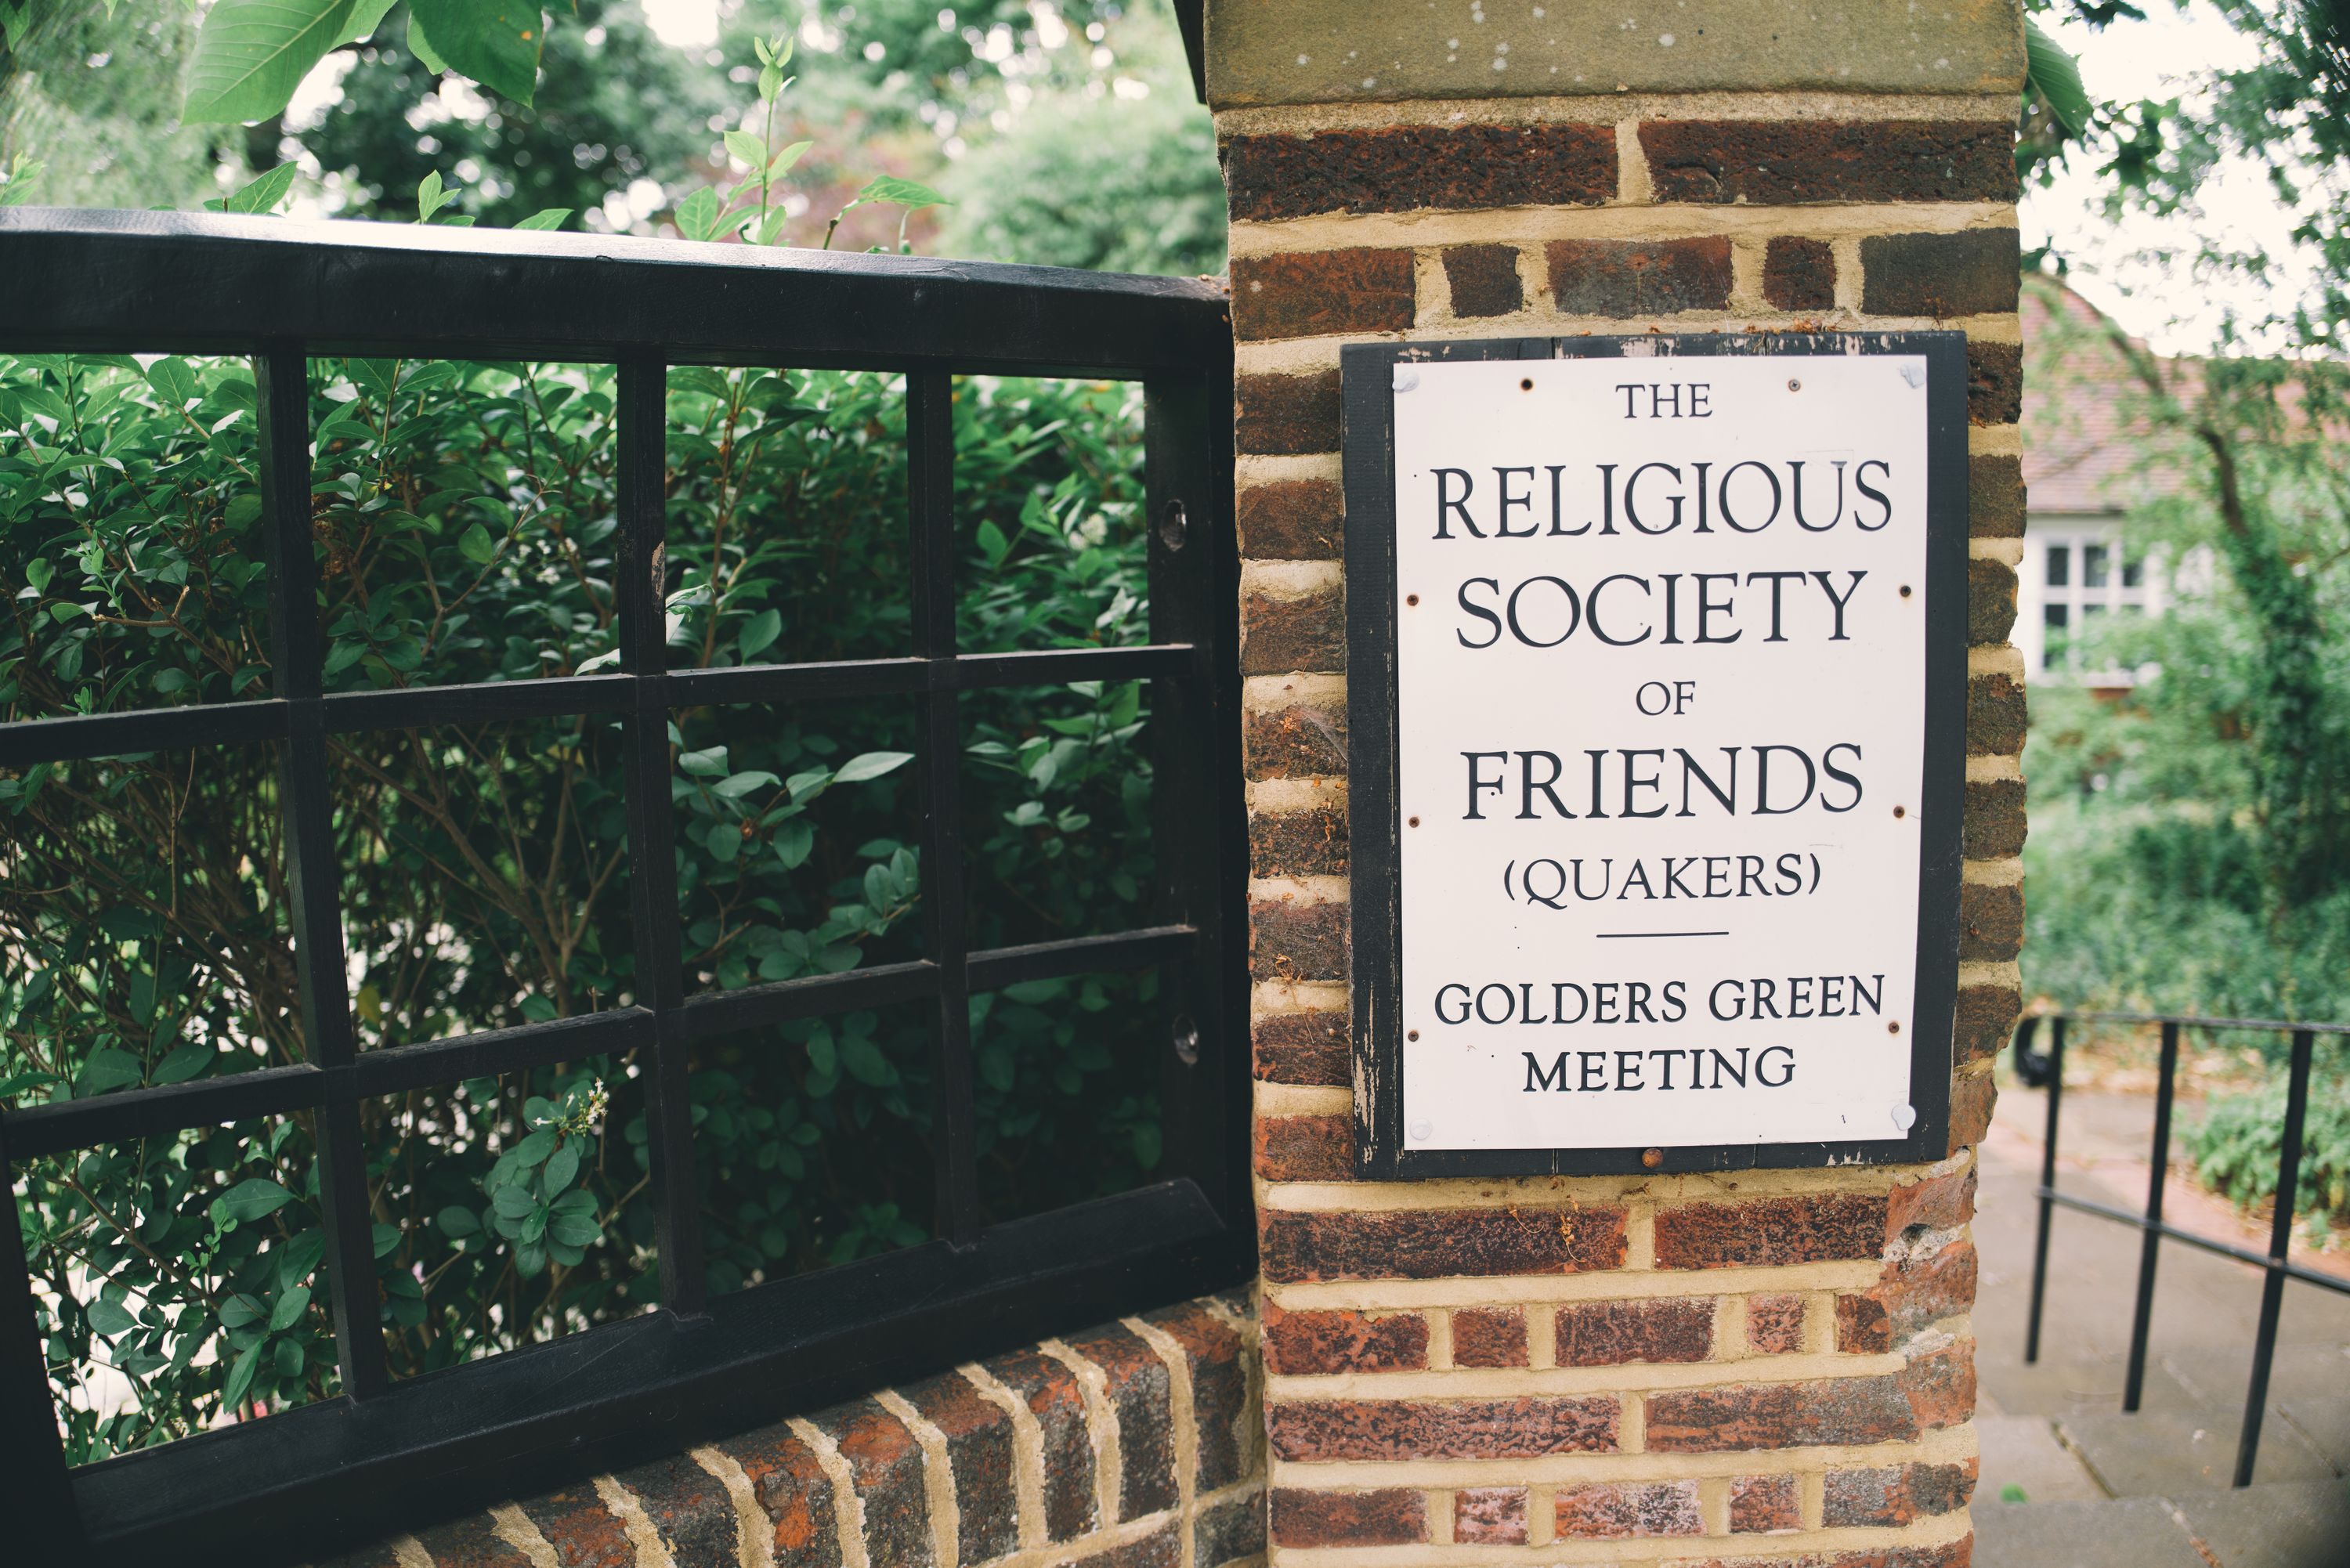 The Religious Society of Friends